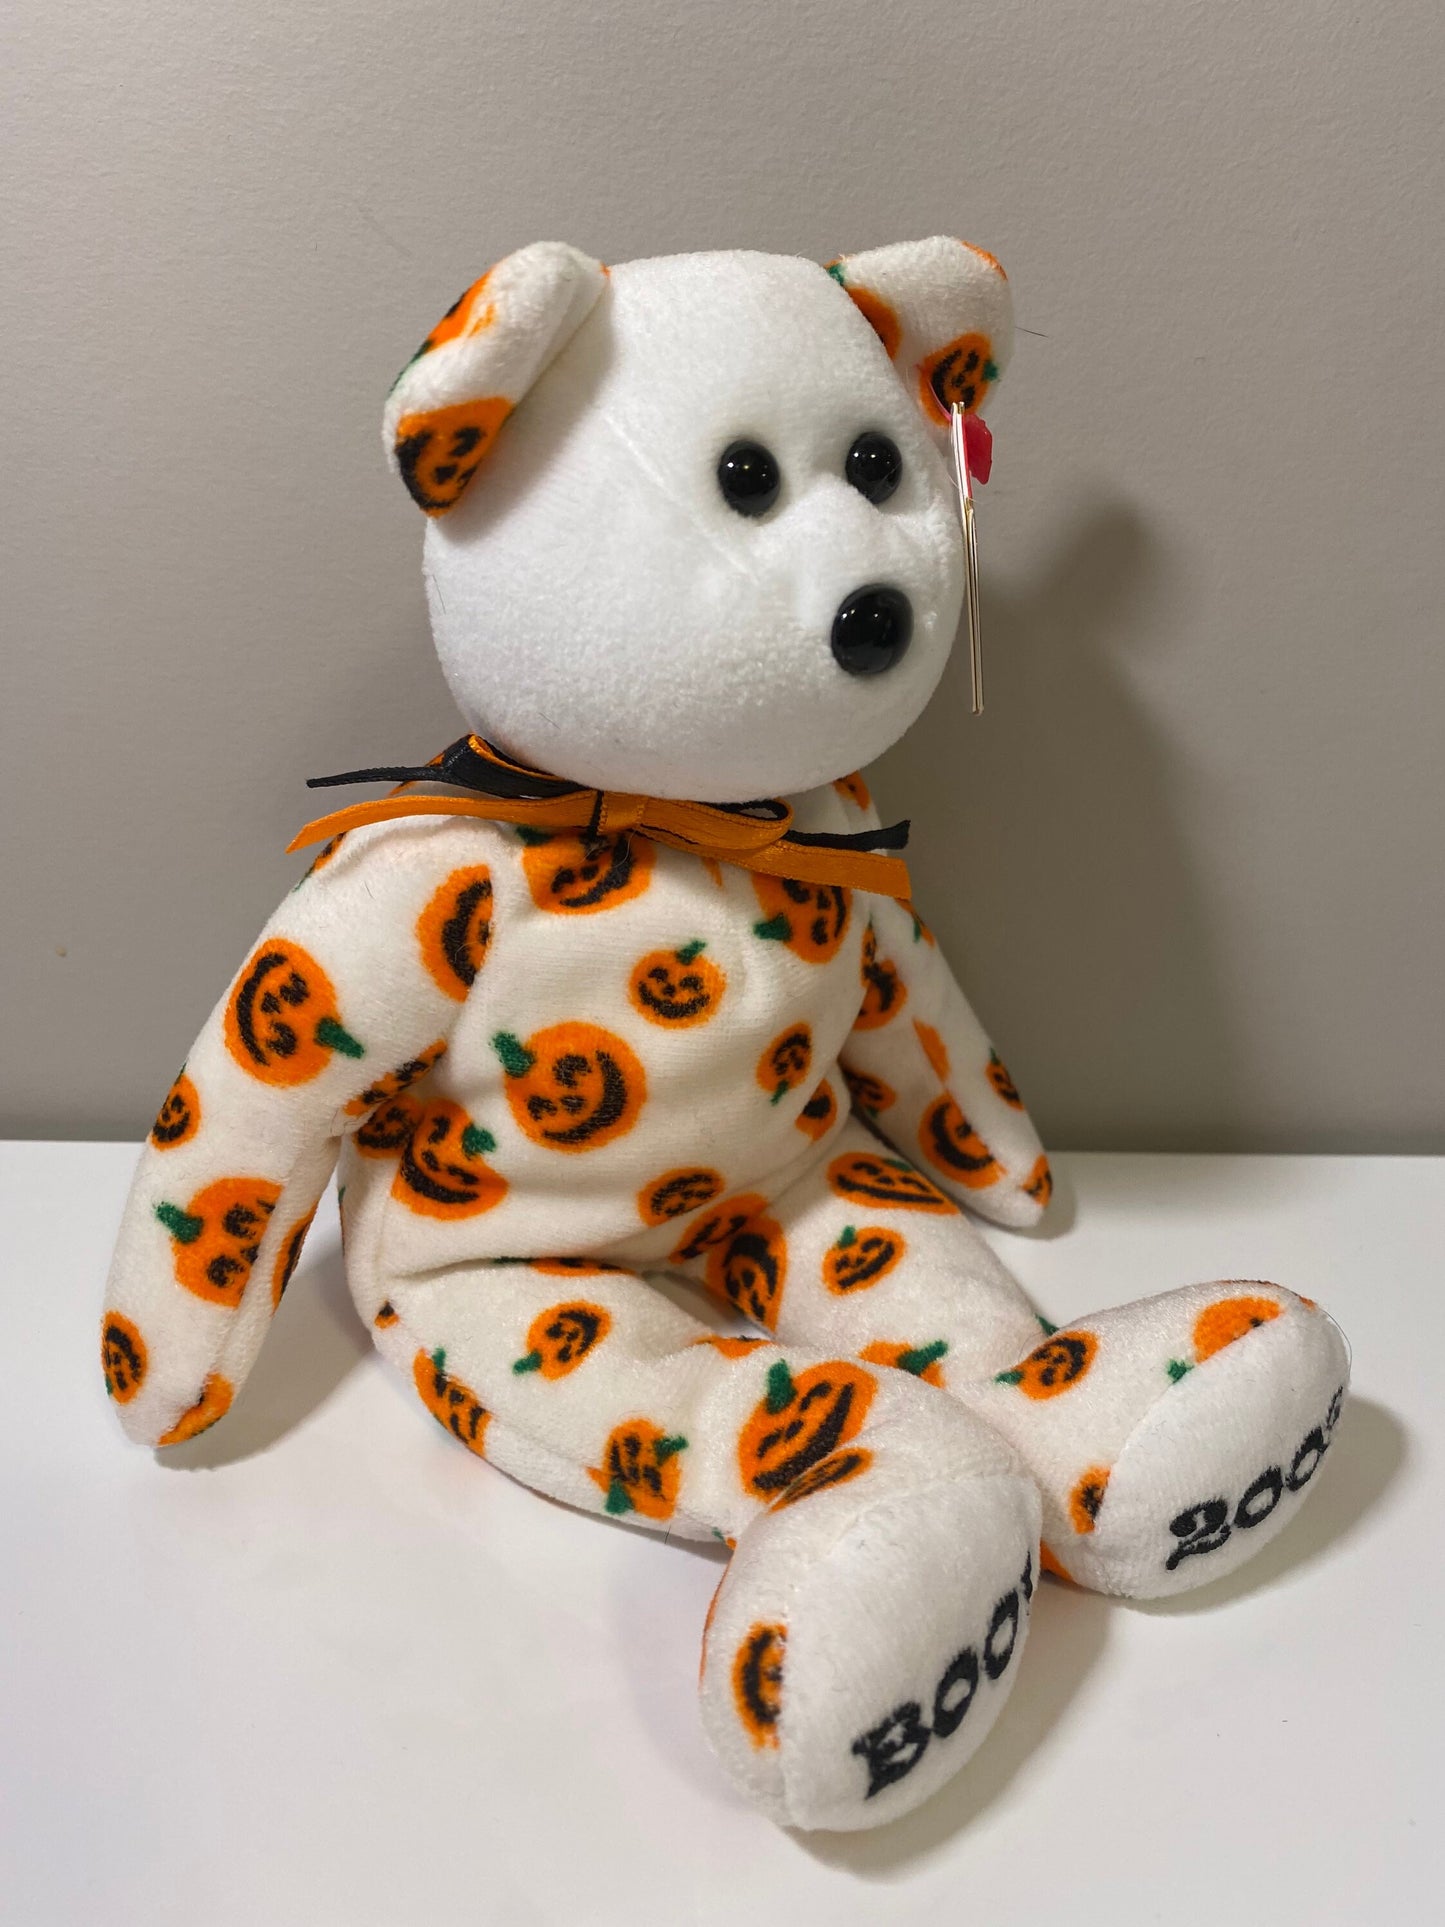 TY Beanie Baby “Carvers” the Halloween Bear with Pumpkins on Body - Hallmark Exclusive (8.5 inch)